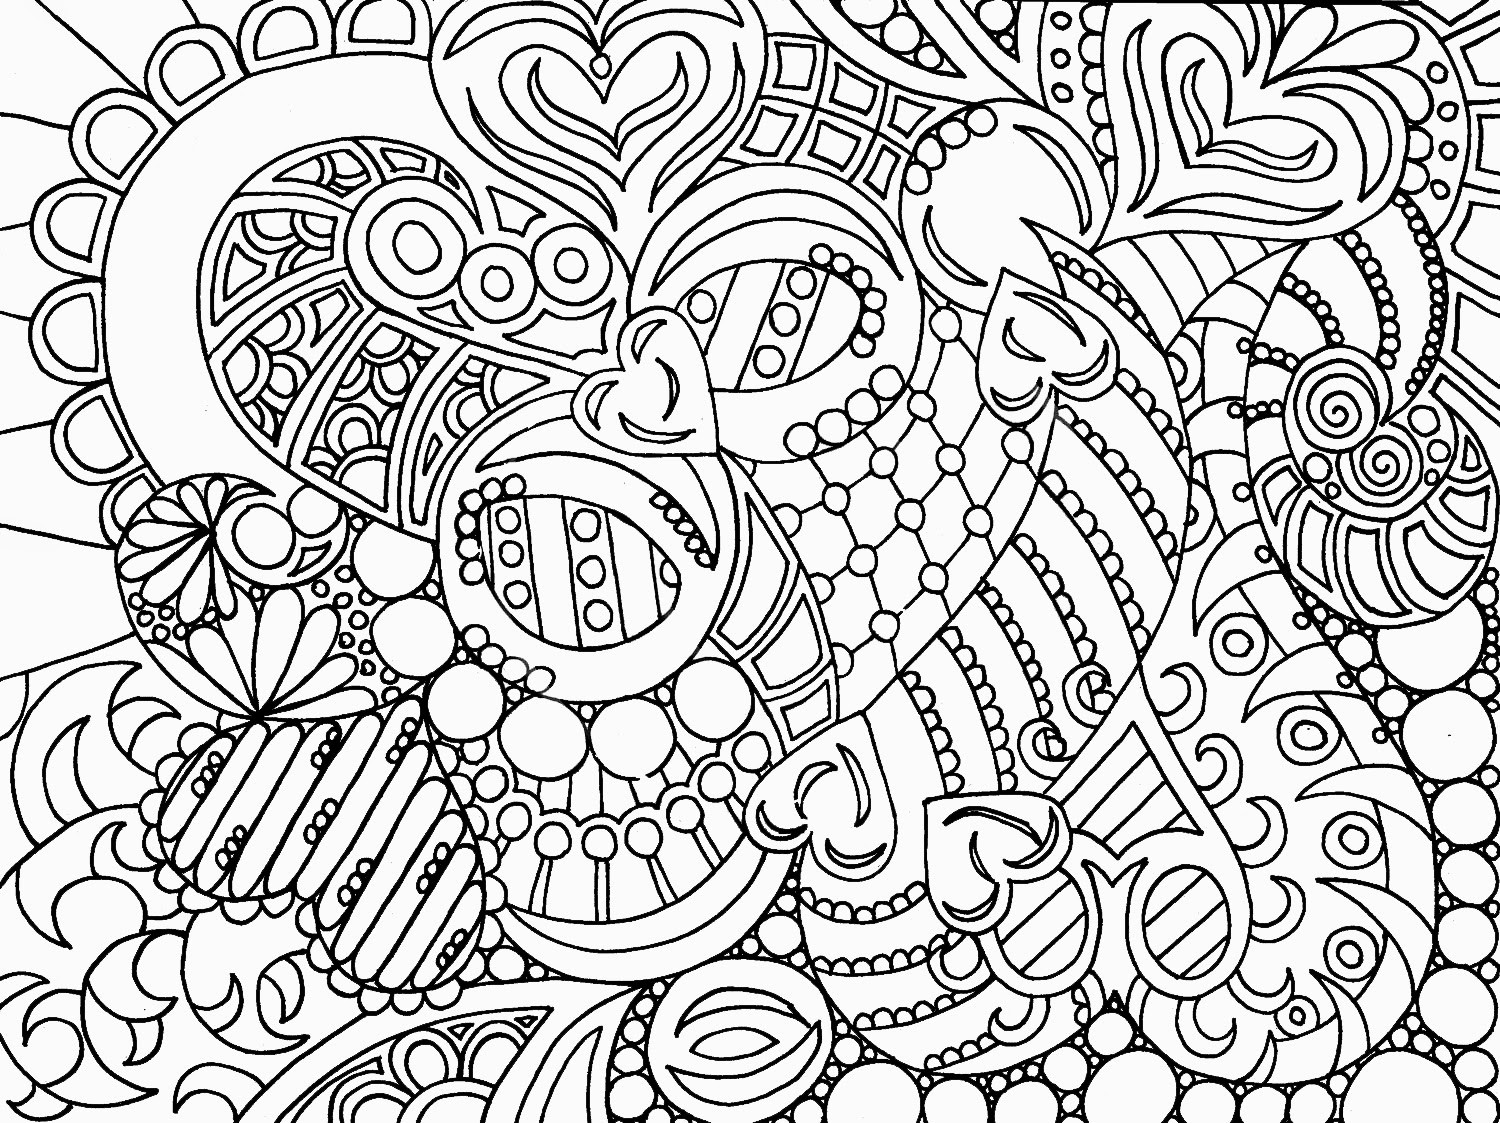 Printable Abstract Coloring Pages For Adults
 Free Abstract Coloring Pages